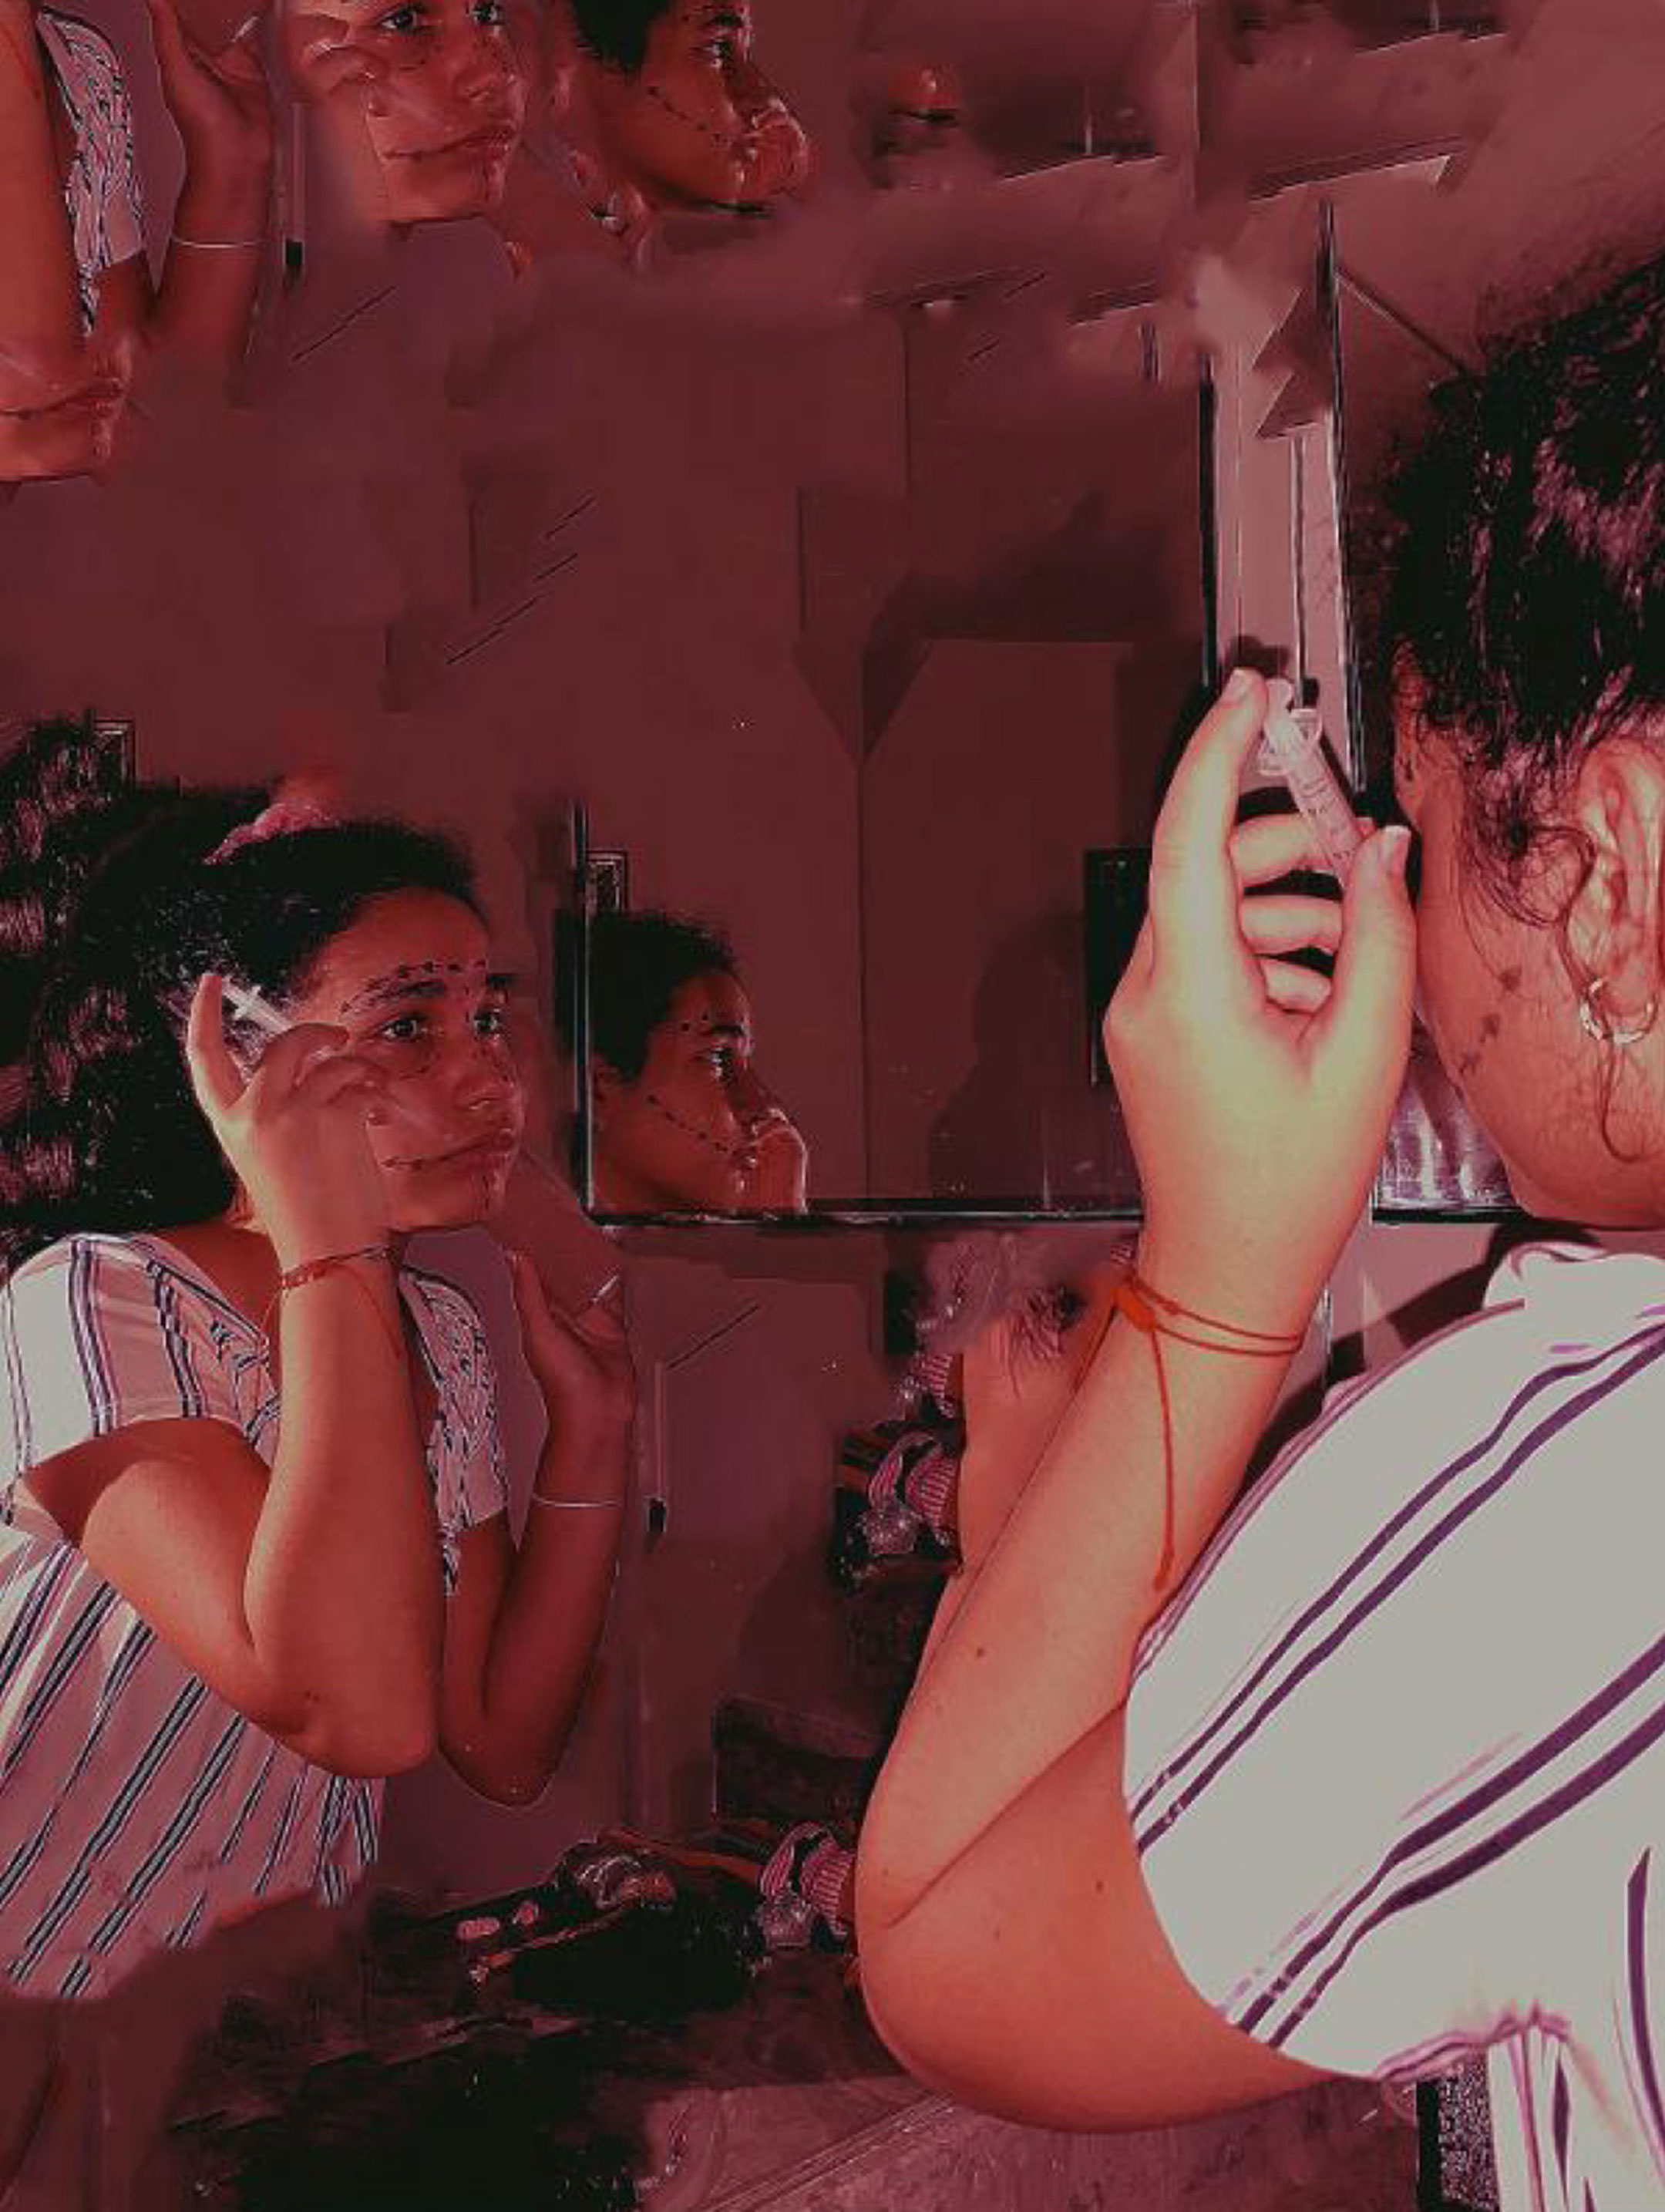 Photograph of a young woman looking in the mirror and manipulating her face